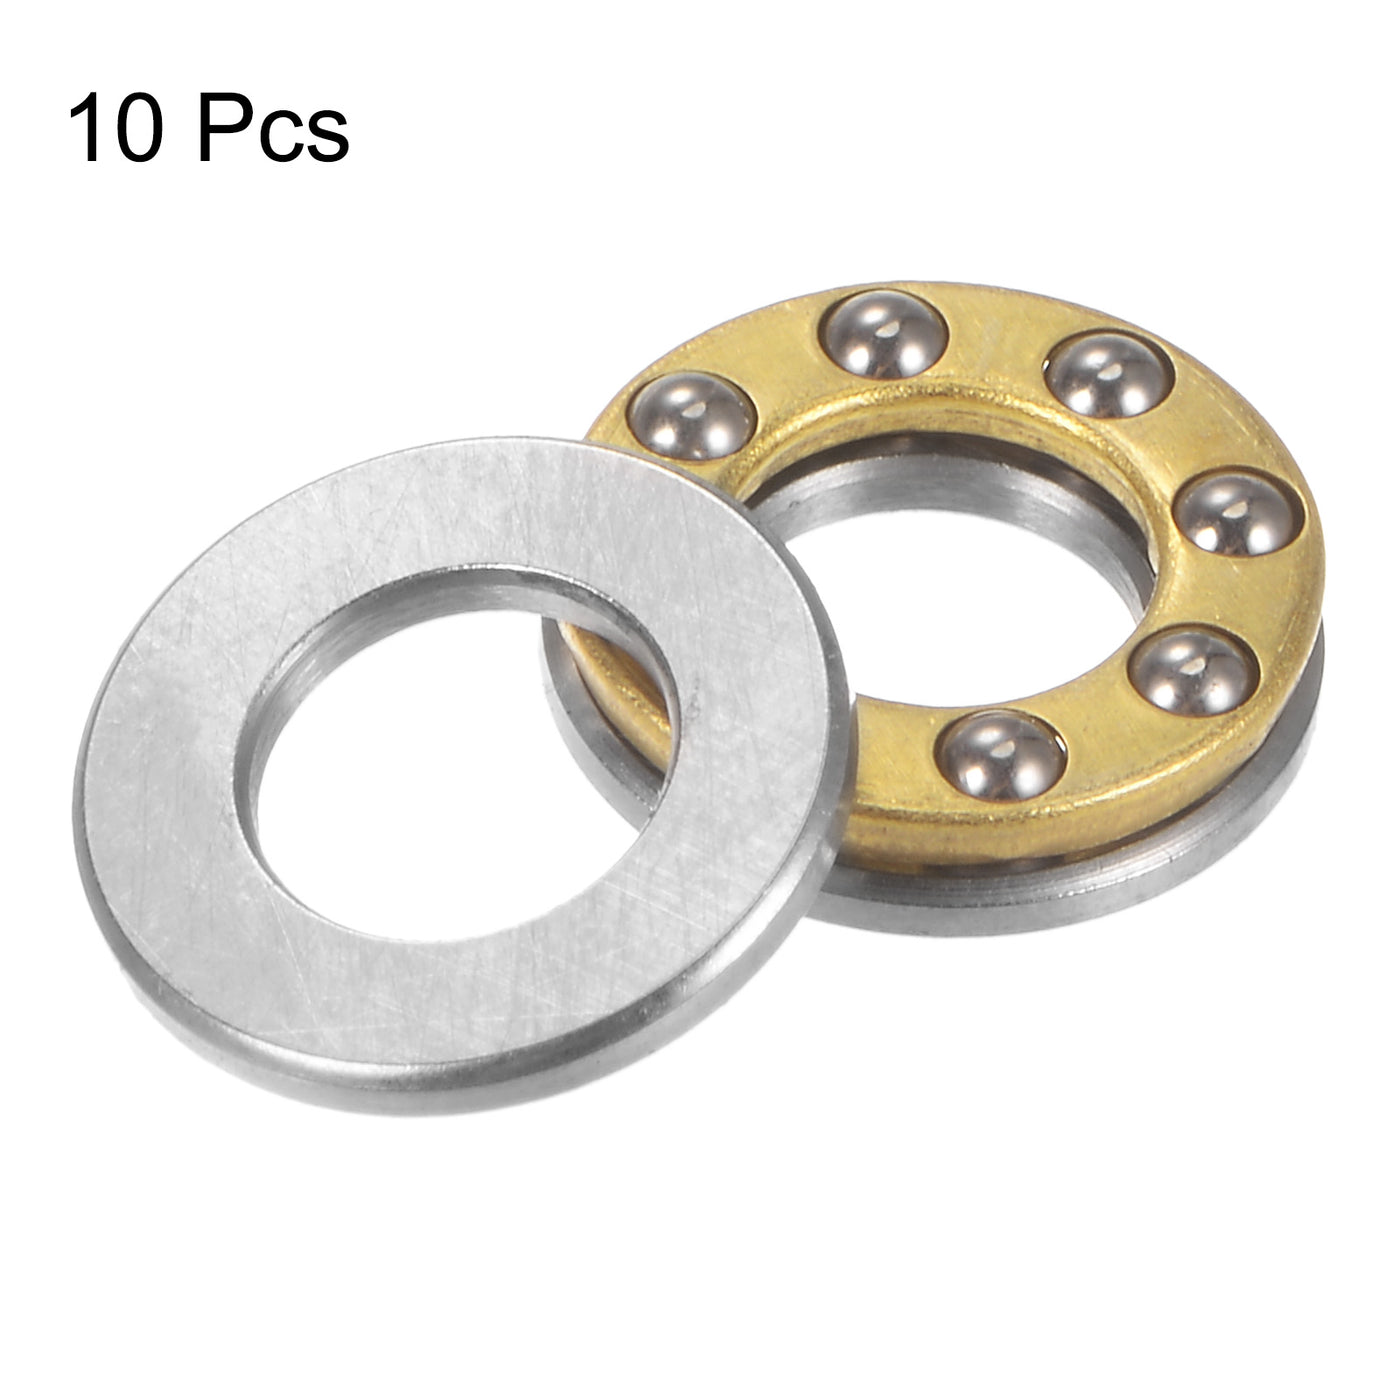 uxcell Uxcell F7-13M Thrust Ball Bearing 7x13x5mm Brass with Washers 10pcs